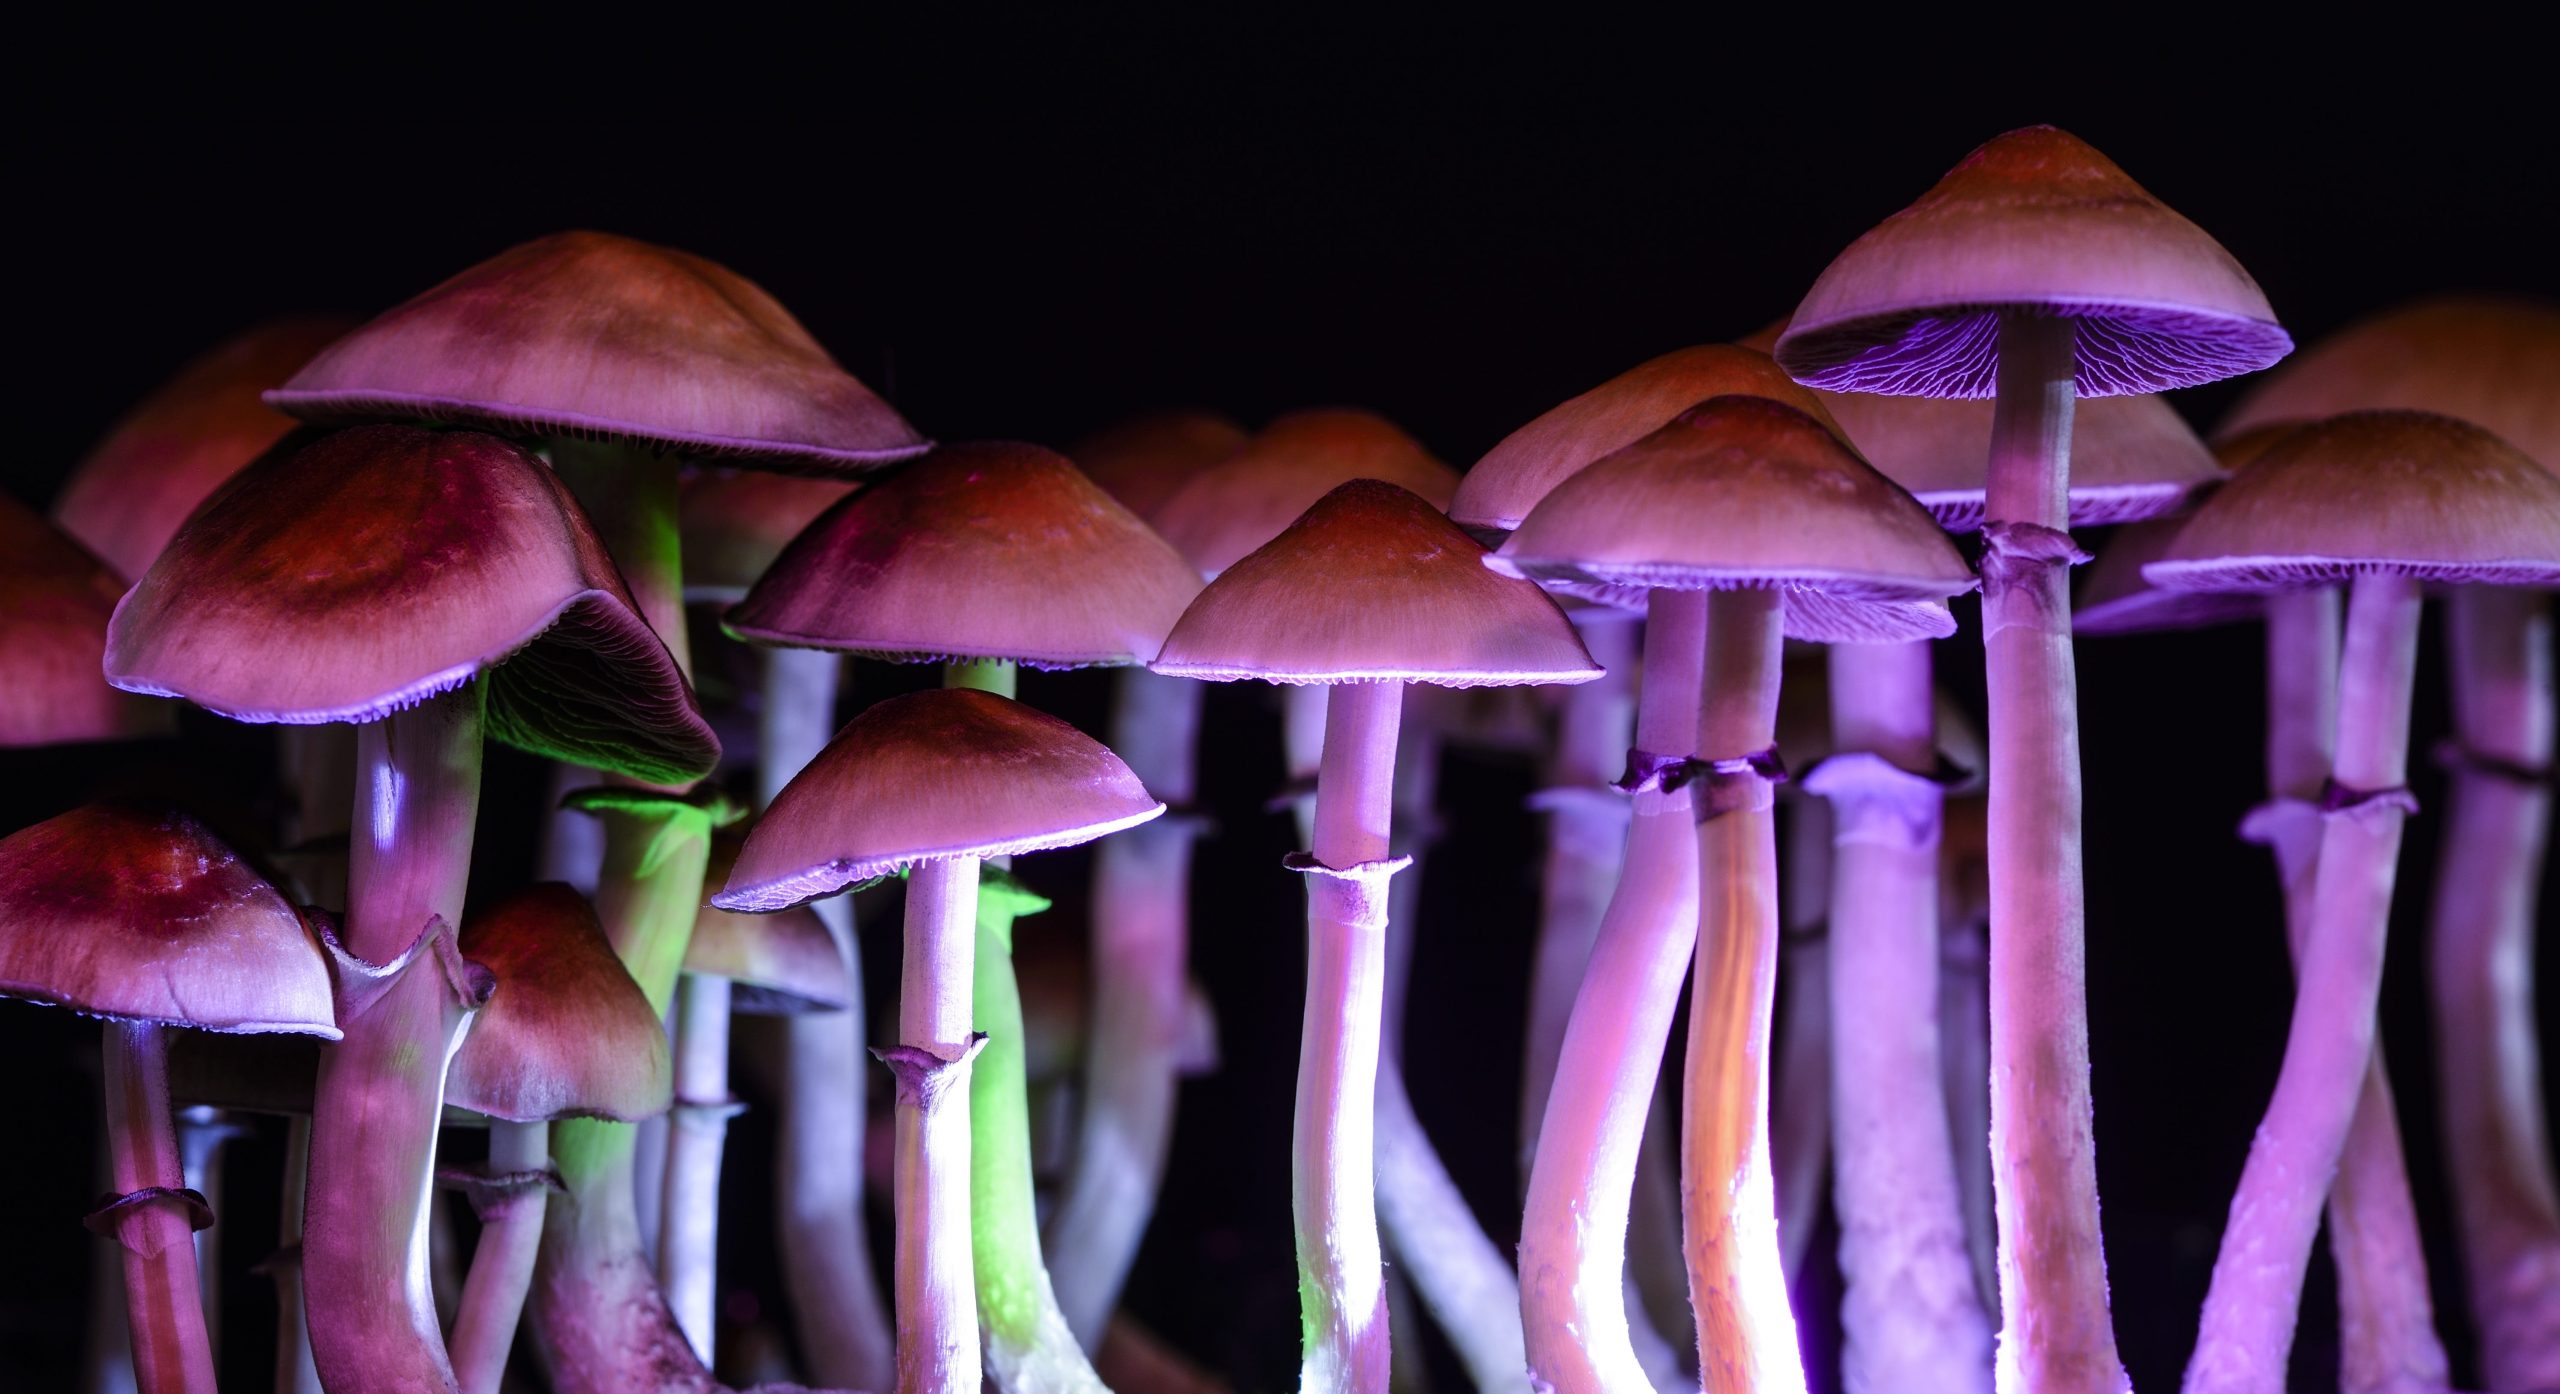 A row of psilocybin mushrooms growing against a black background